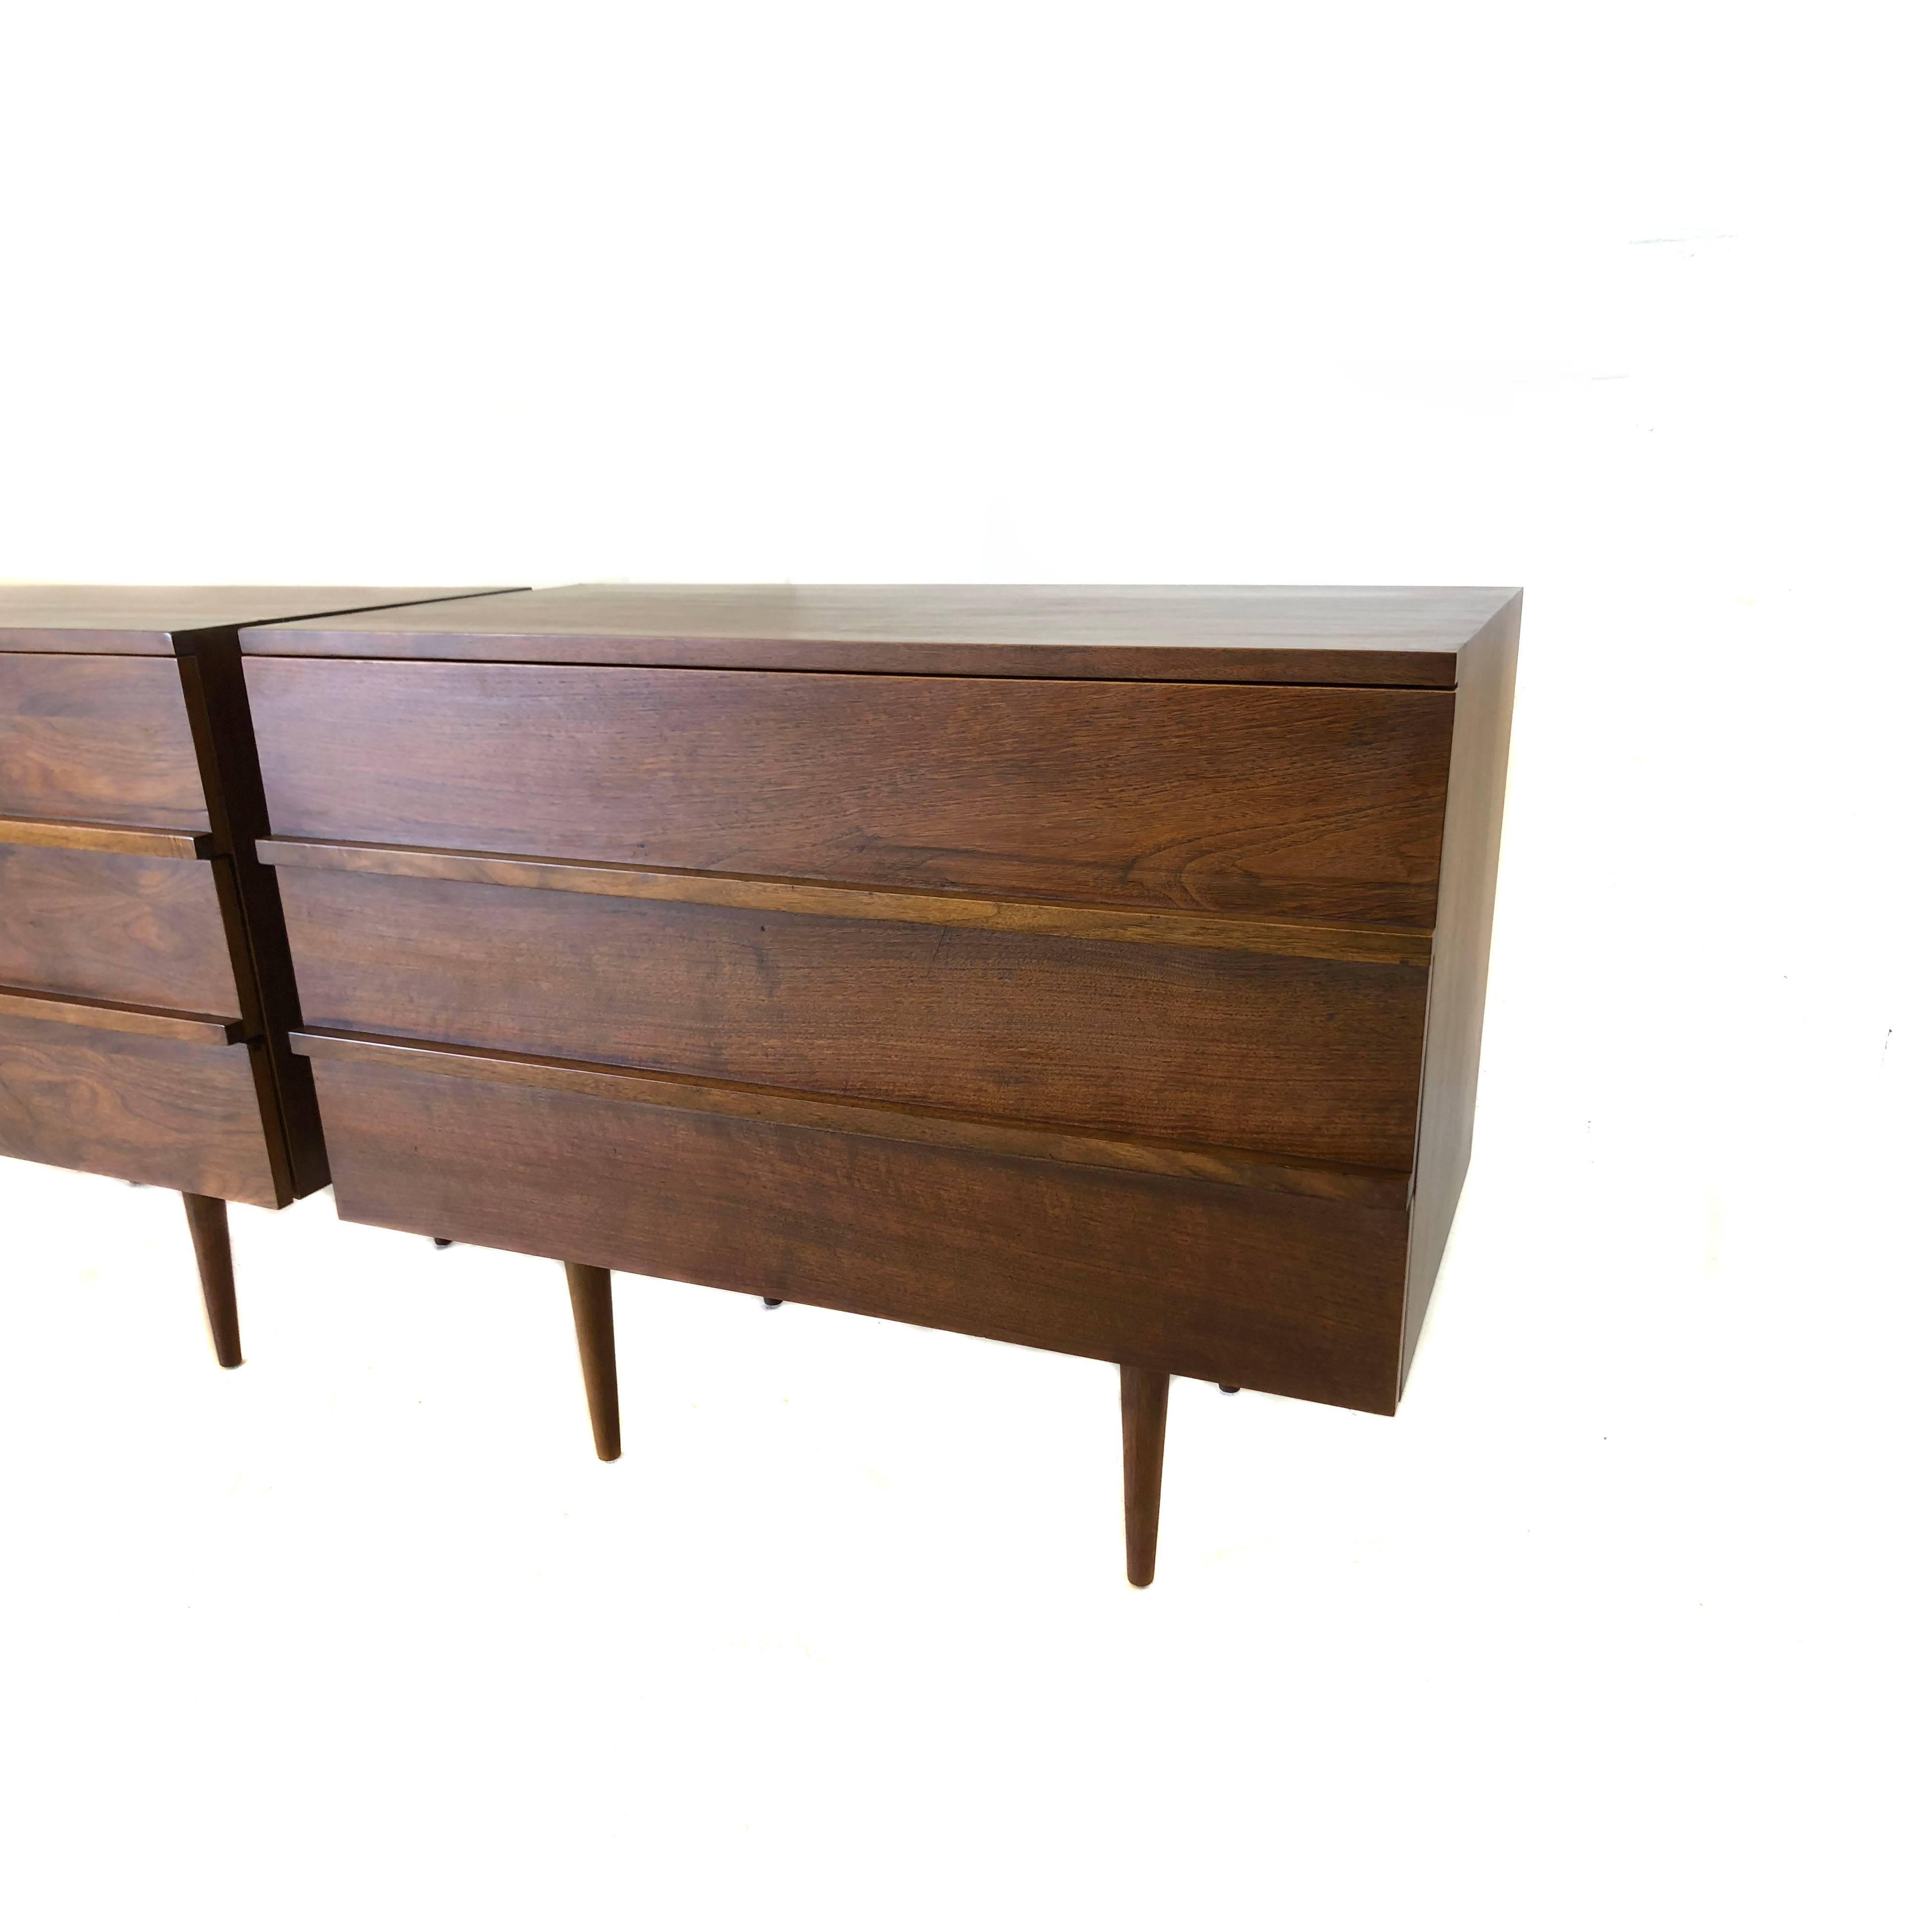 A lovely pair of dressers by Mel Smilow produced in the 1950s. Solid walnut with three drawers. In very good condition with age appropriate wear, some minor scratching. One dresser has slightly warped bottom causing lower most drawer to open with